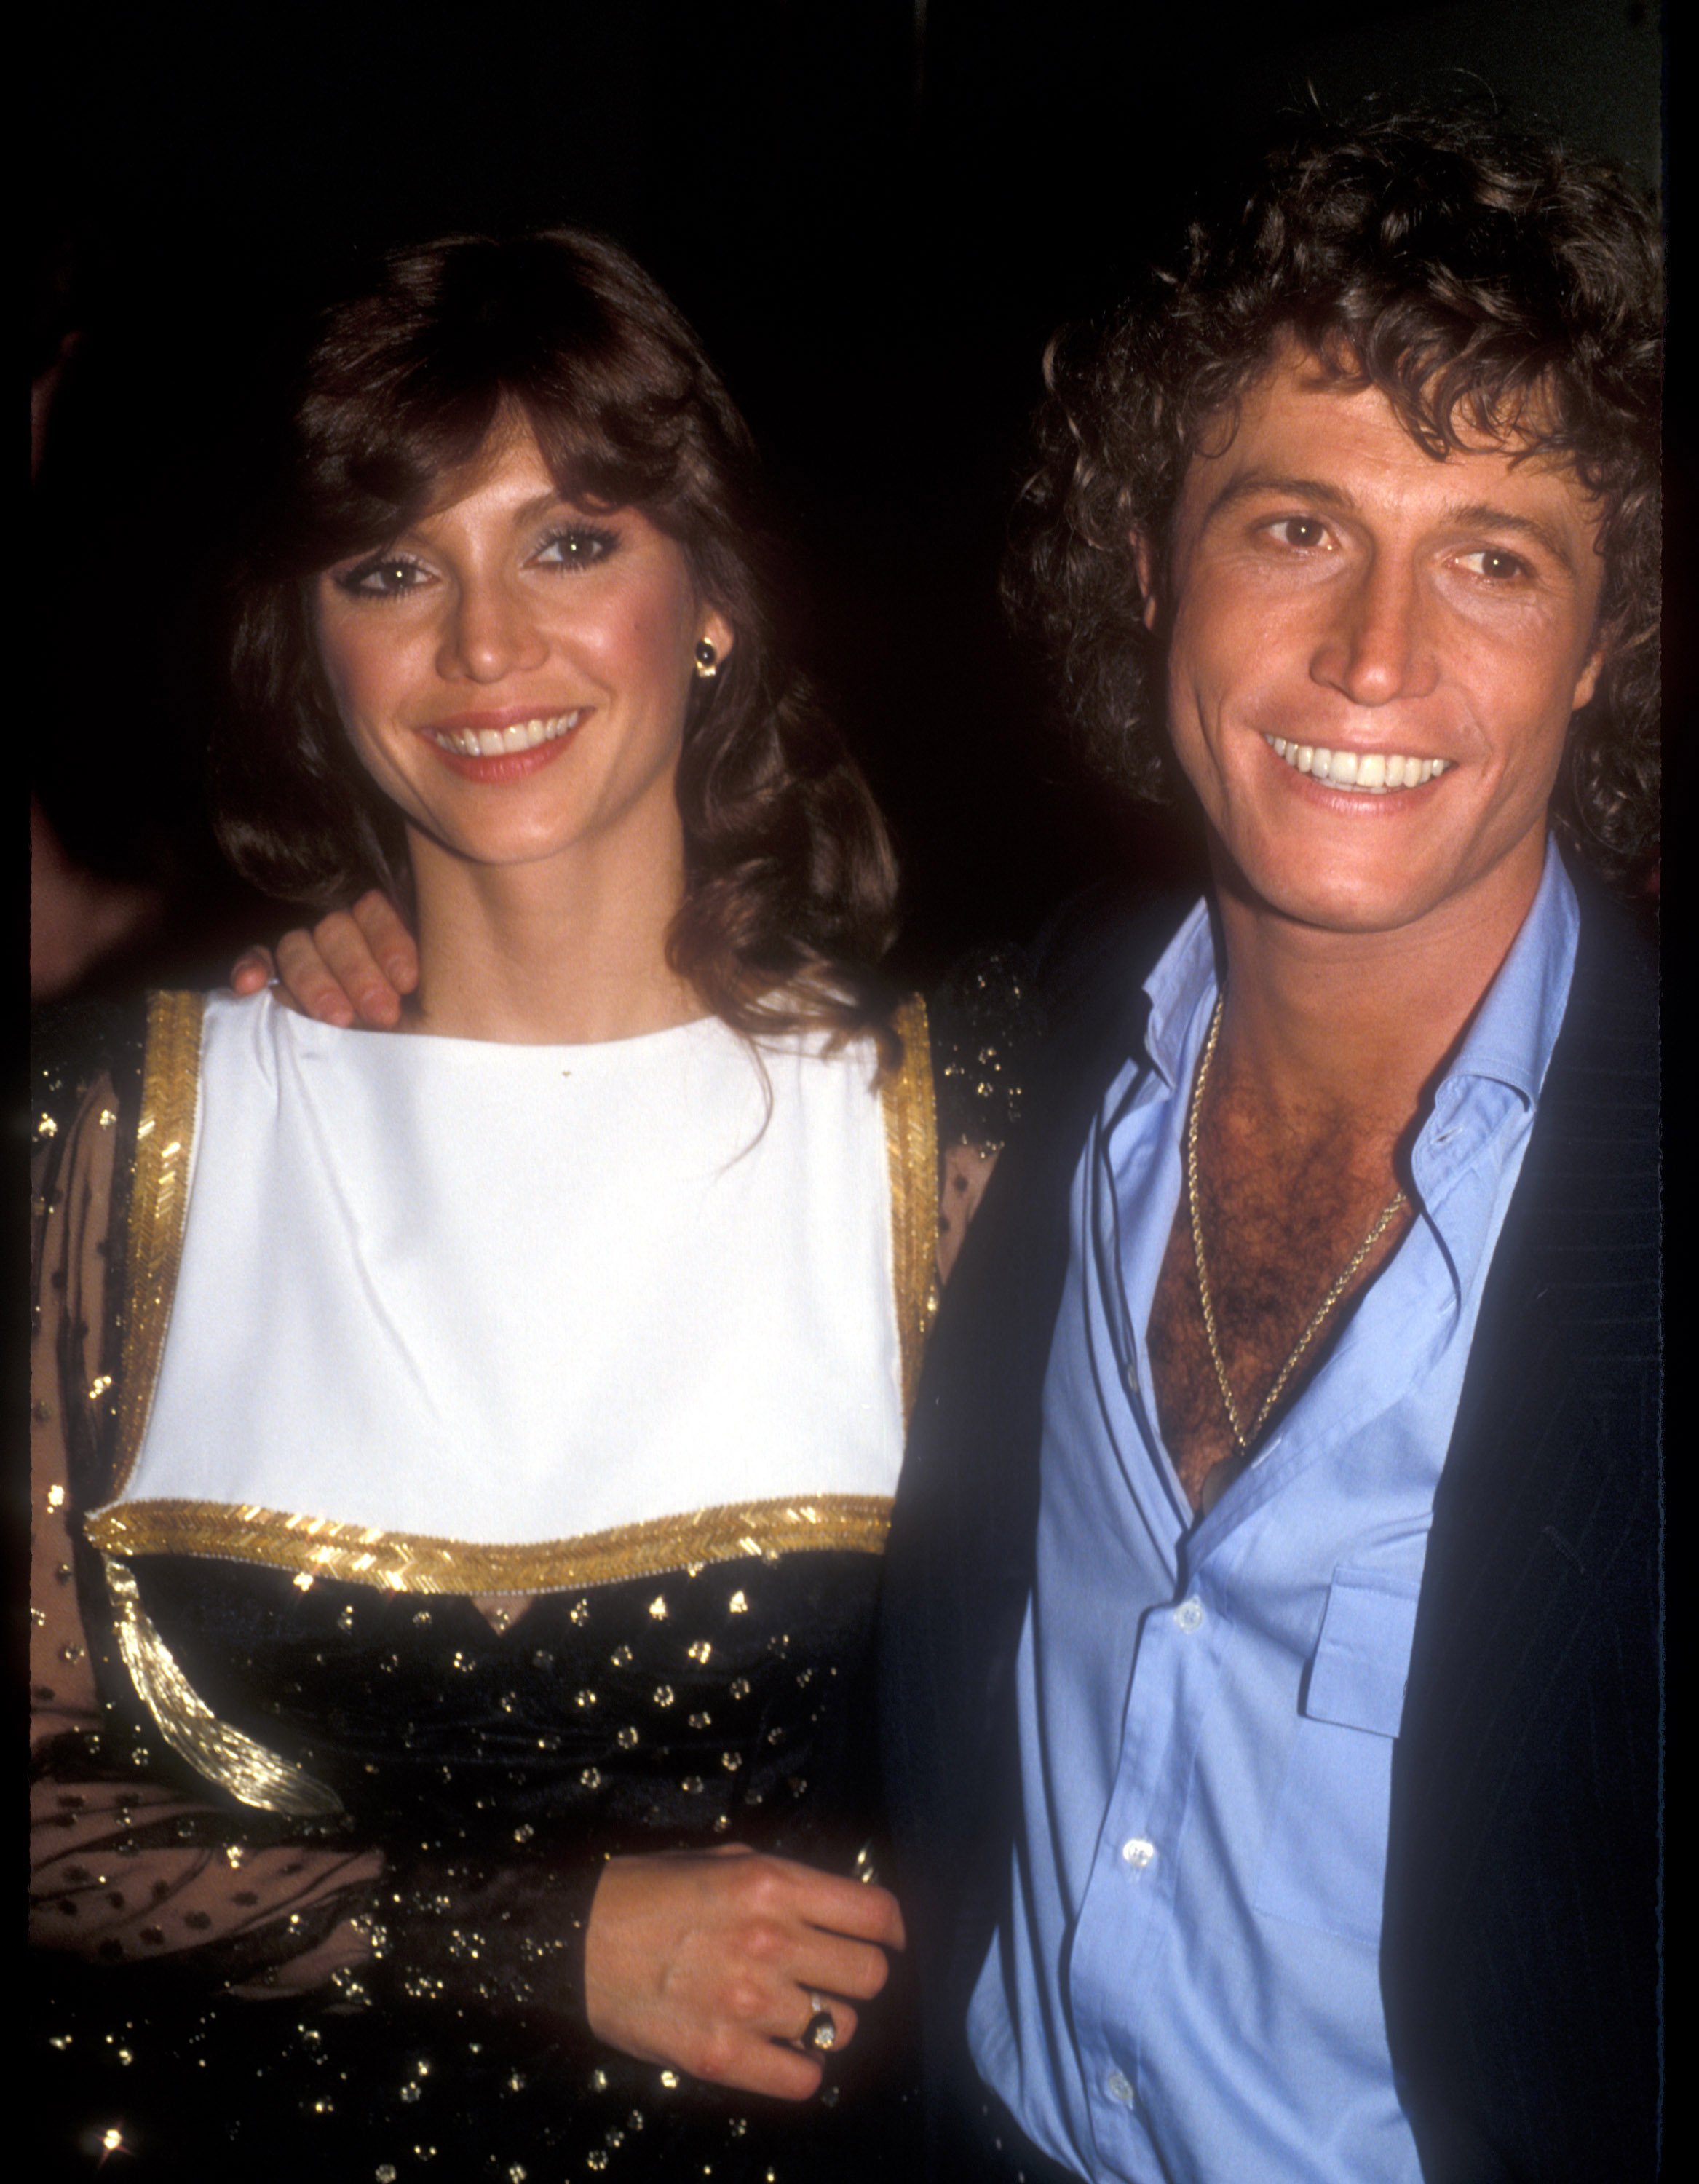 File Photo of Victoria Principal & Andy Gibb at the Pirates of Penzance play opening in Los Angeles, California on June 10, 1981. | Source: Getty Images